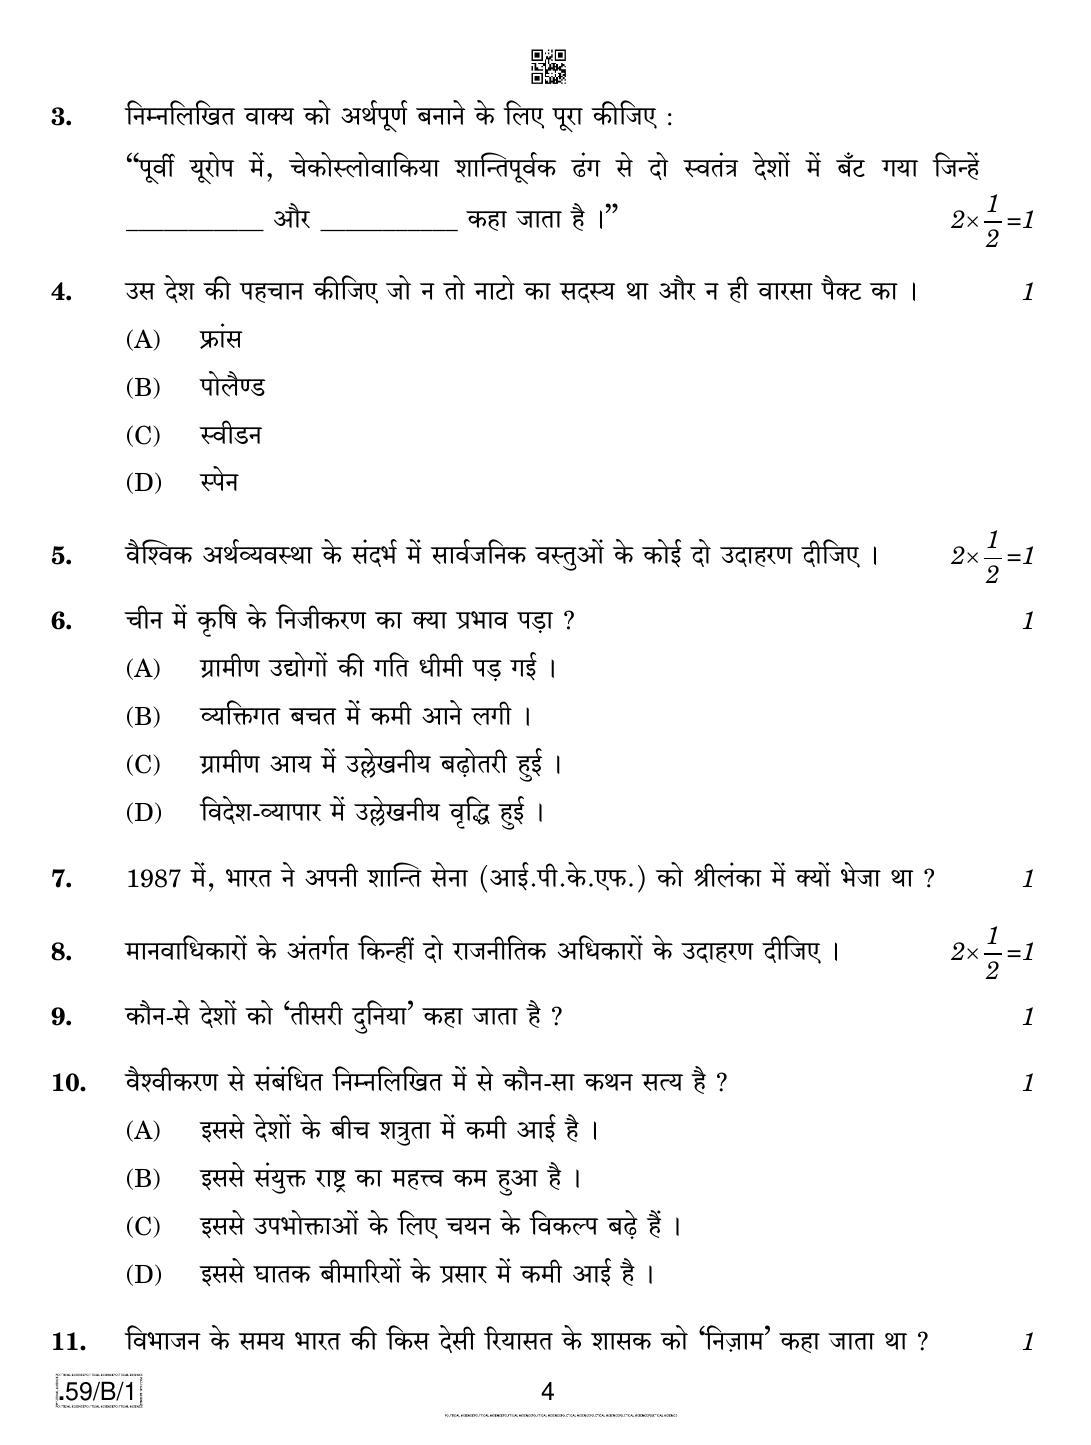 CBSE Class 12 59-C-1 - Political Science 2020 Compartment Question Paper - Page 4